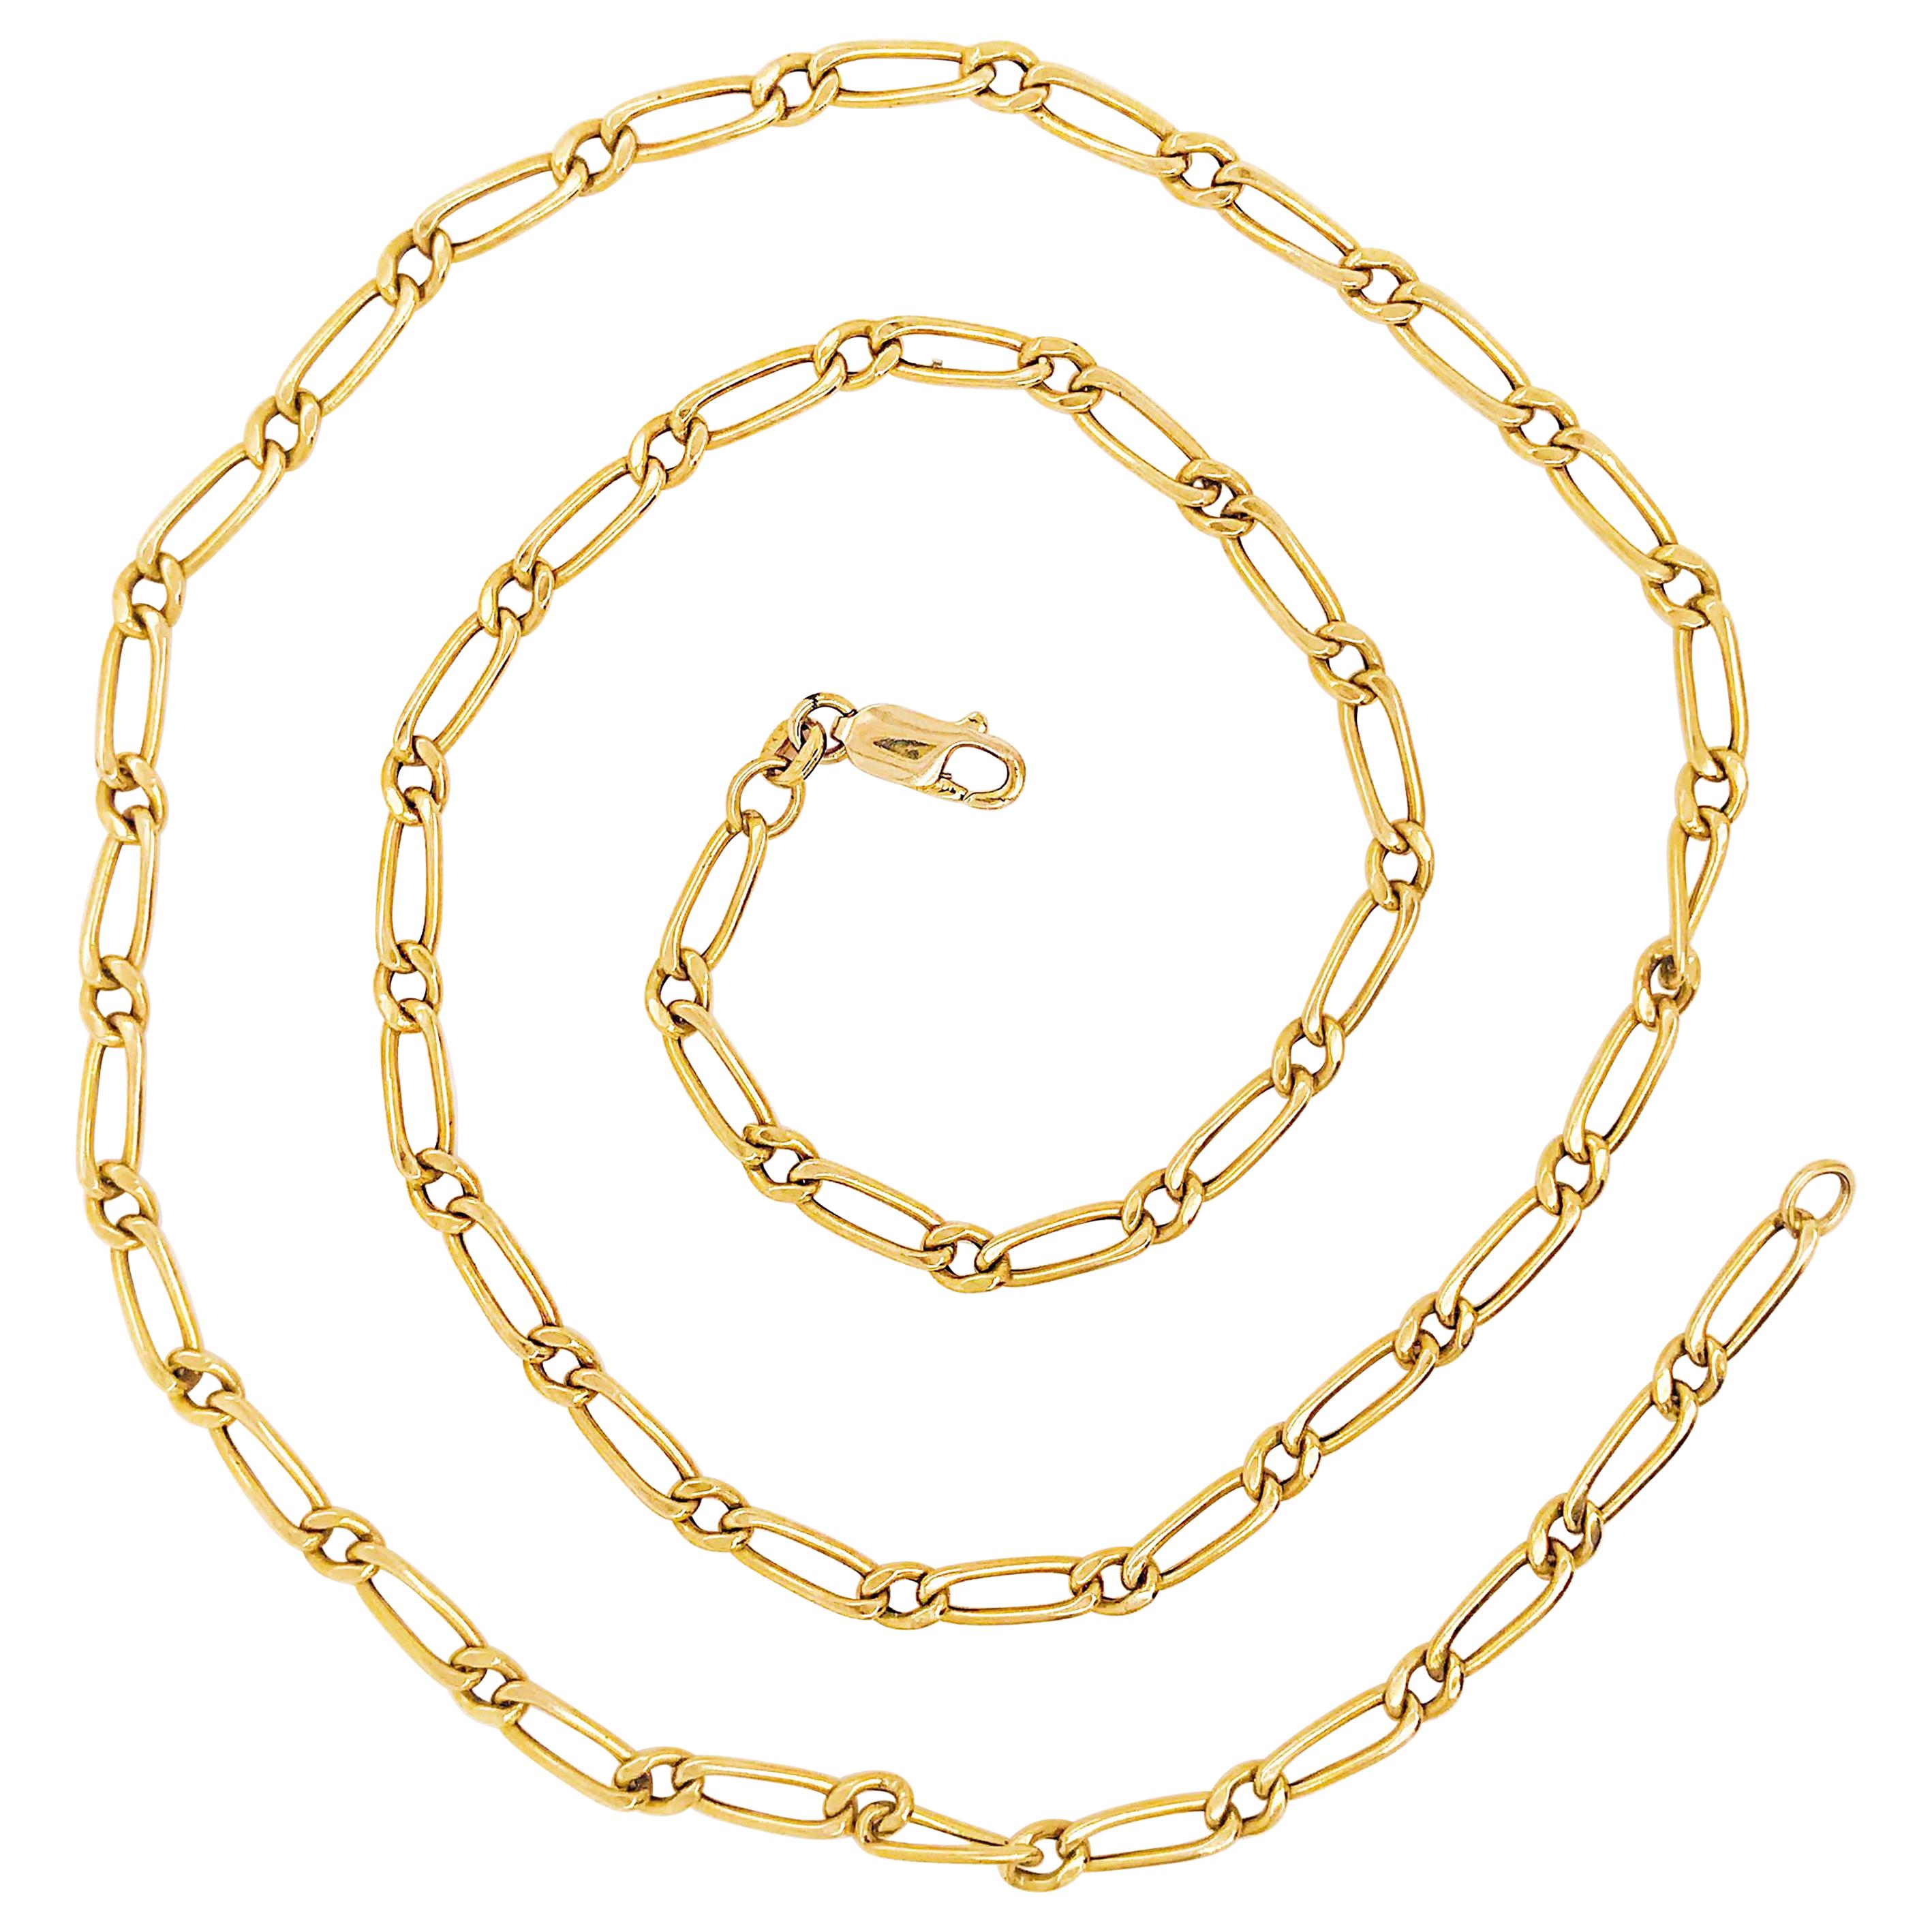 Paperclip Link Figaro Necklace with Large Clasp, 14 Karat Gold, circa 1995